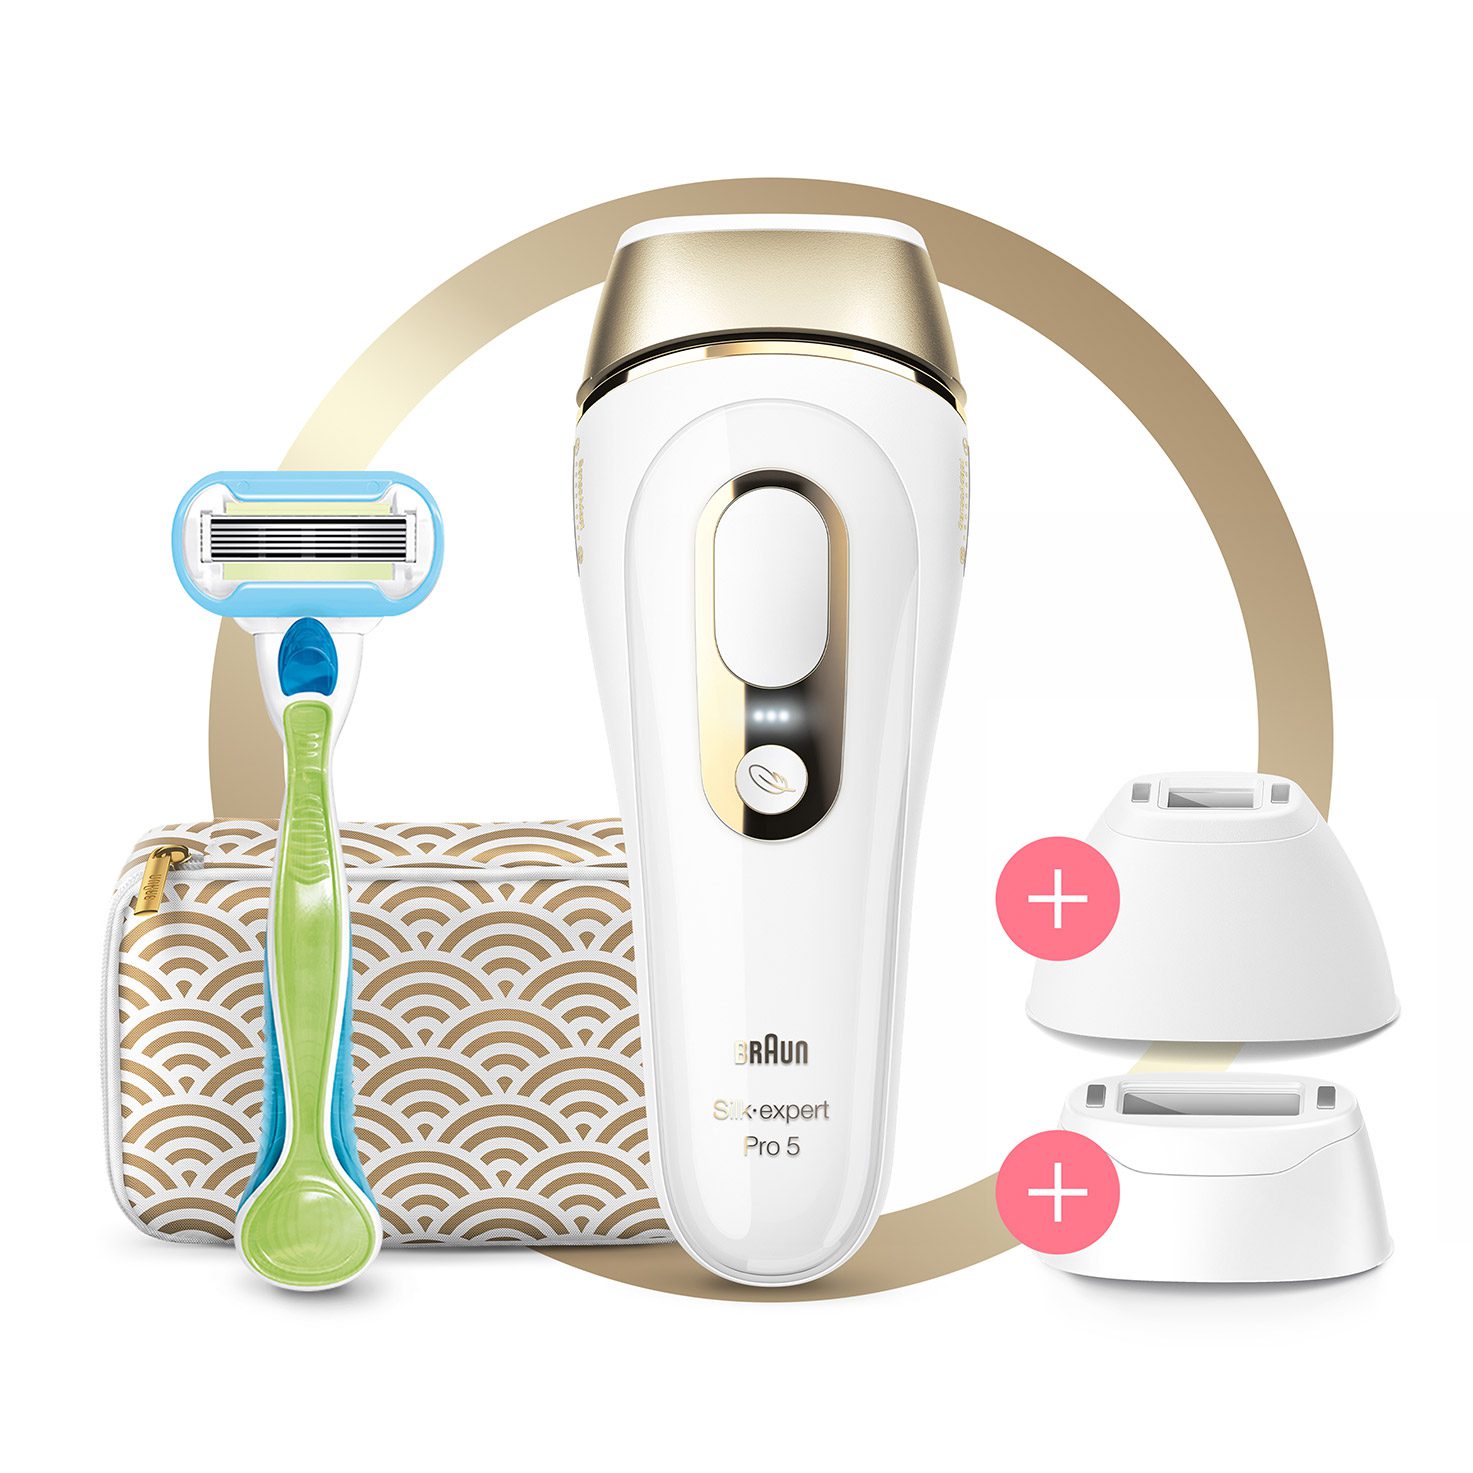 braun silk expert ipl hair removal system review & Price - Beauty Bx